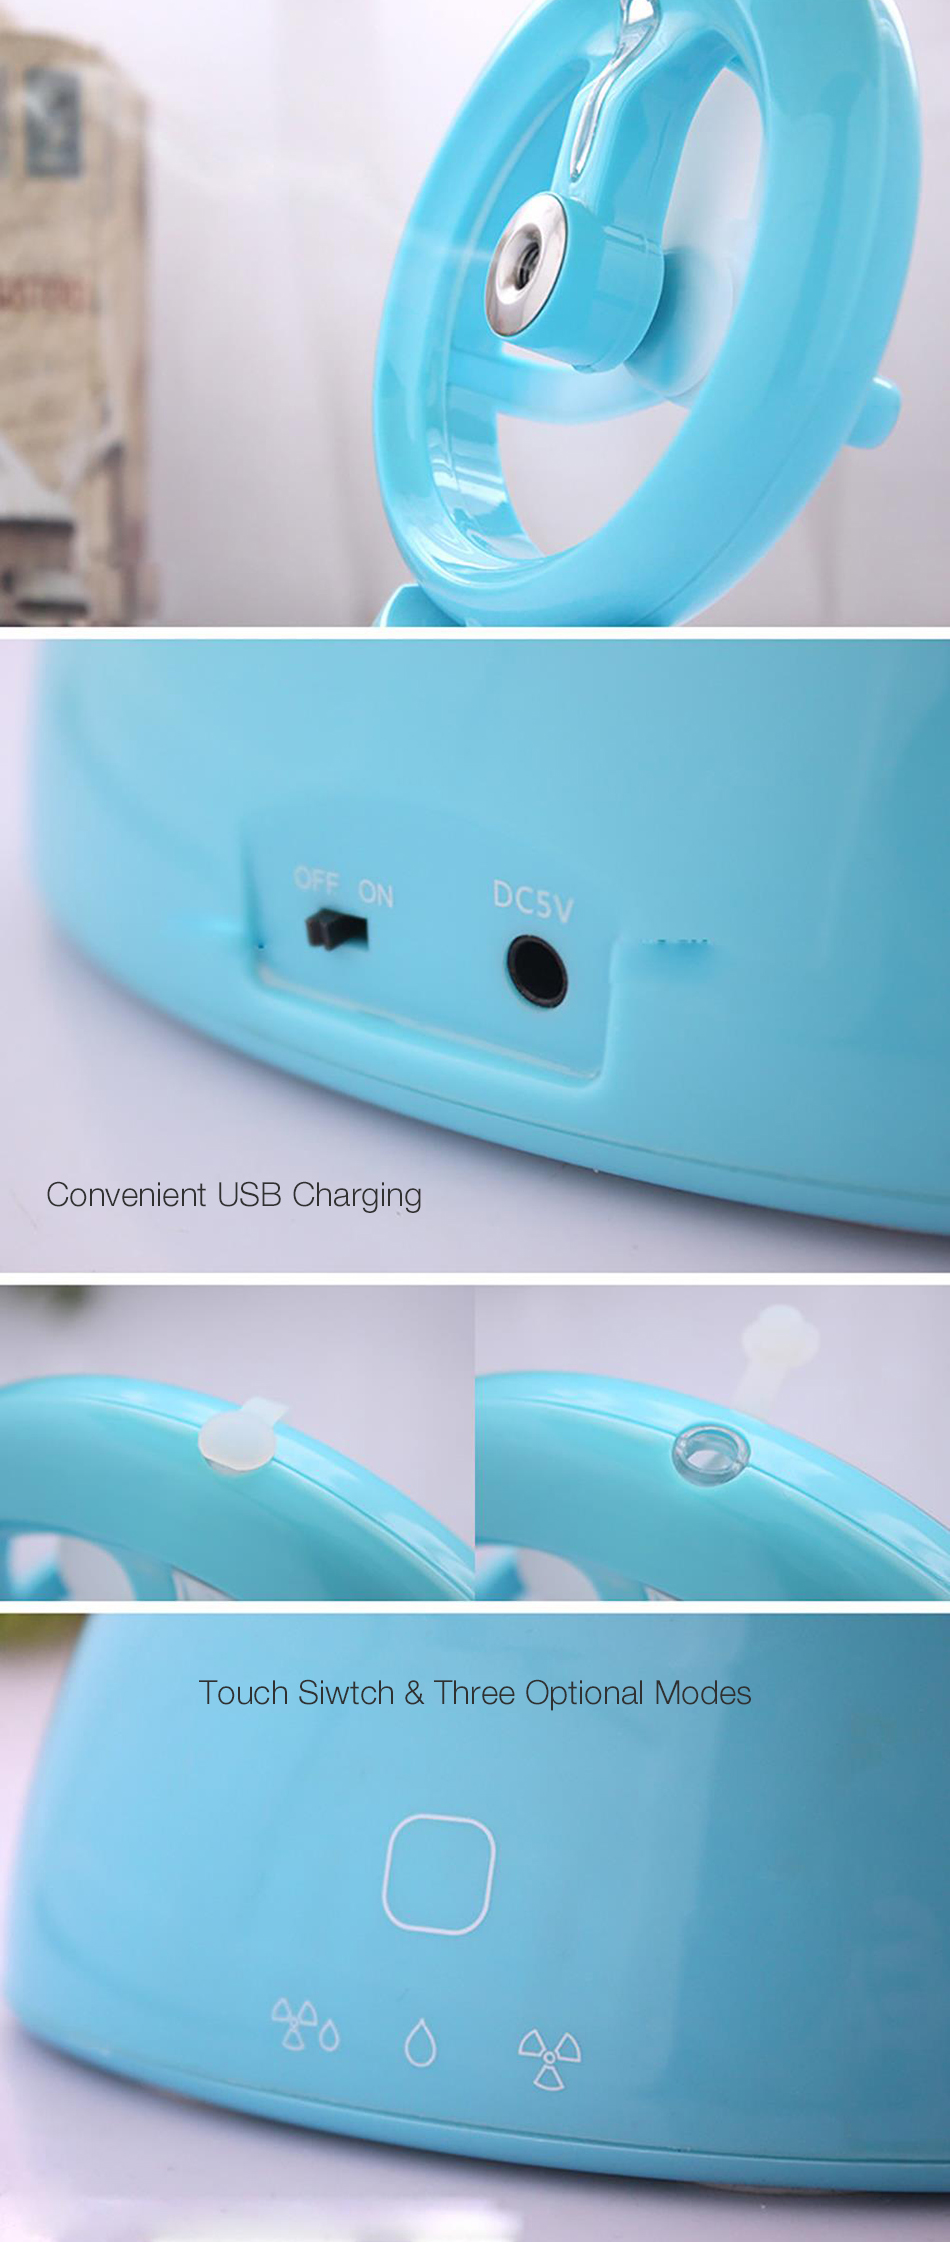 Home Mini Portable 2 in 1 Electronic Desktop USB Rechargeable Air Humidifier Cooling Spray Fan 